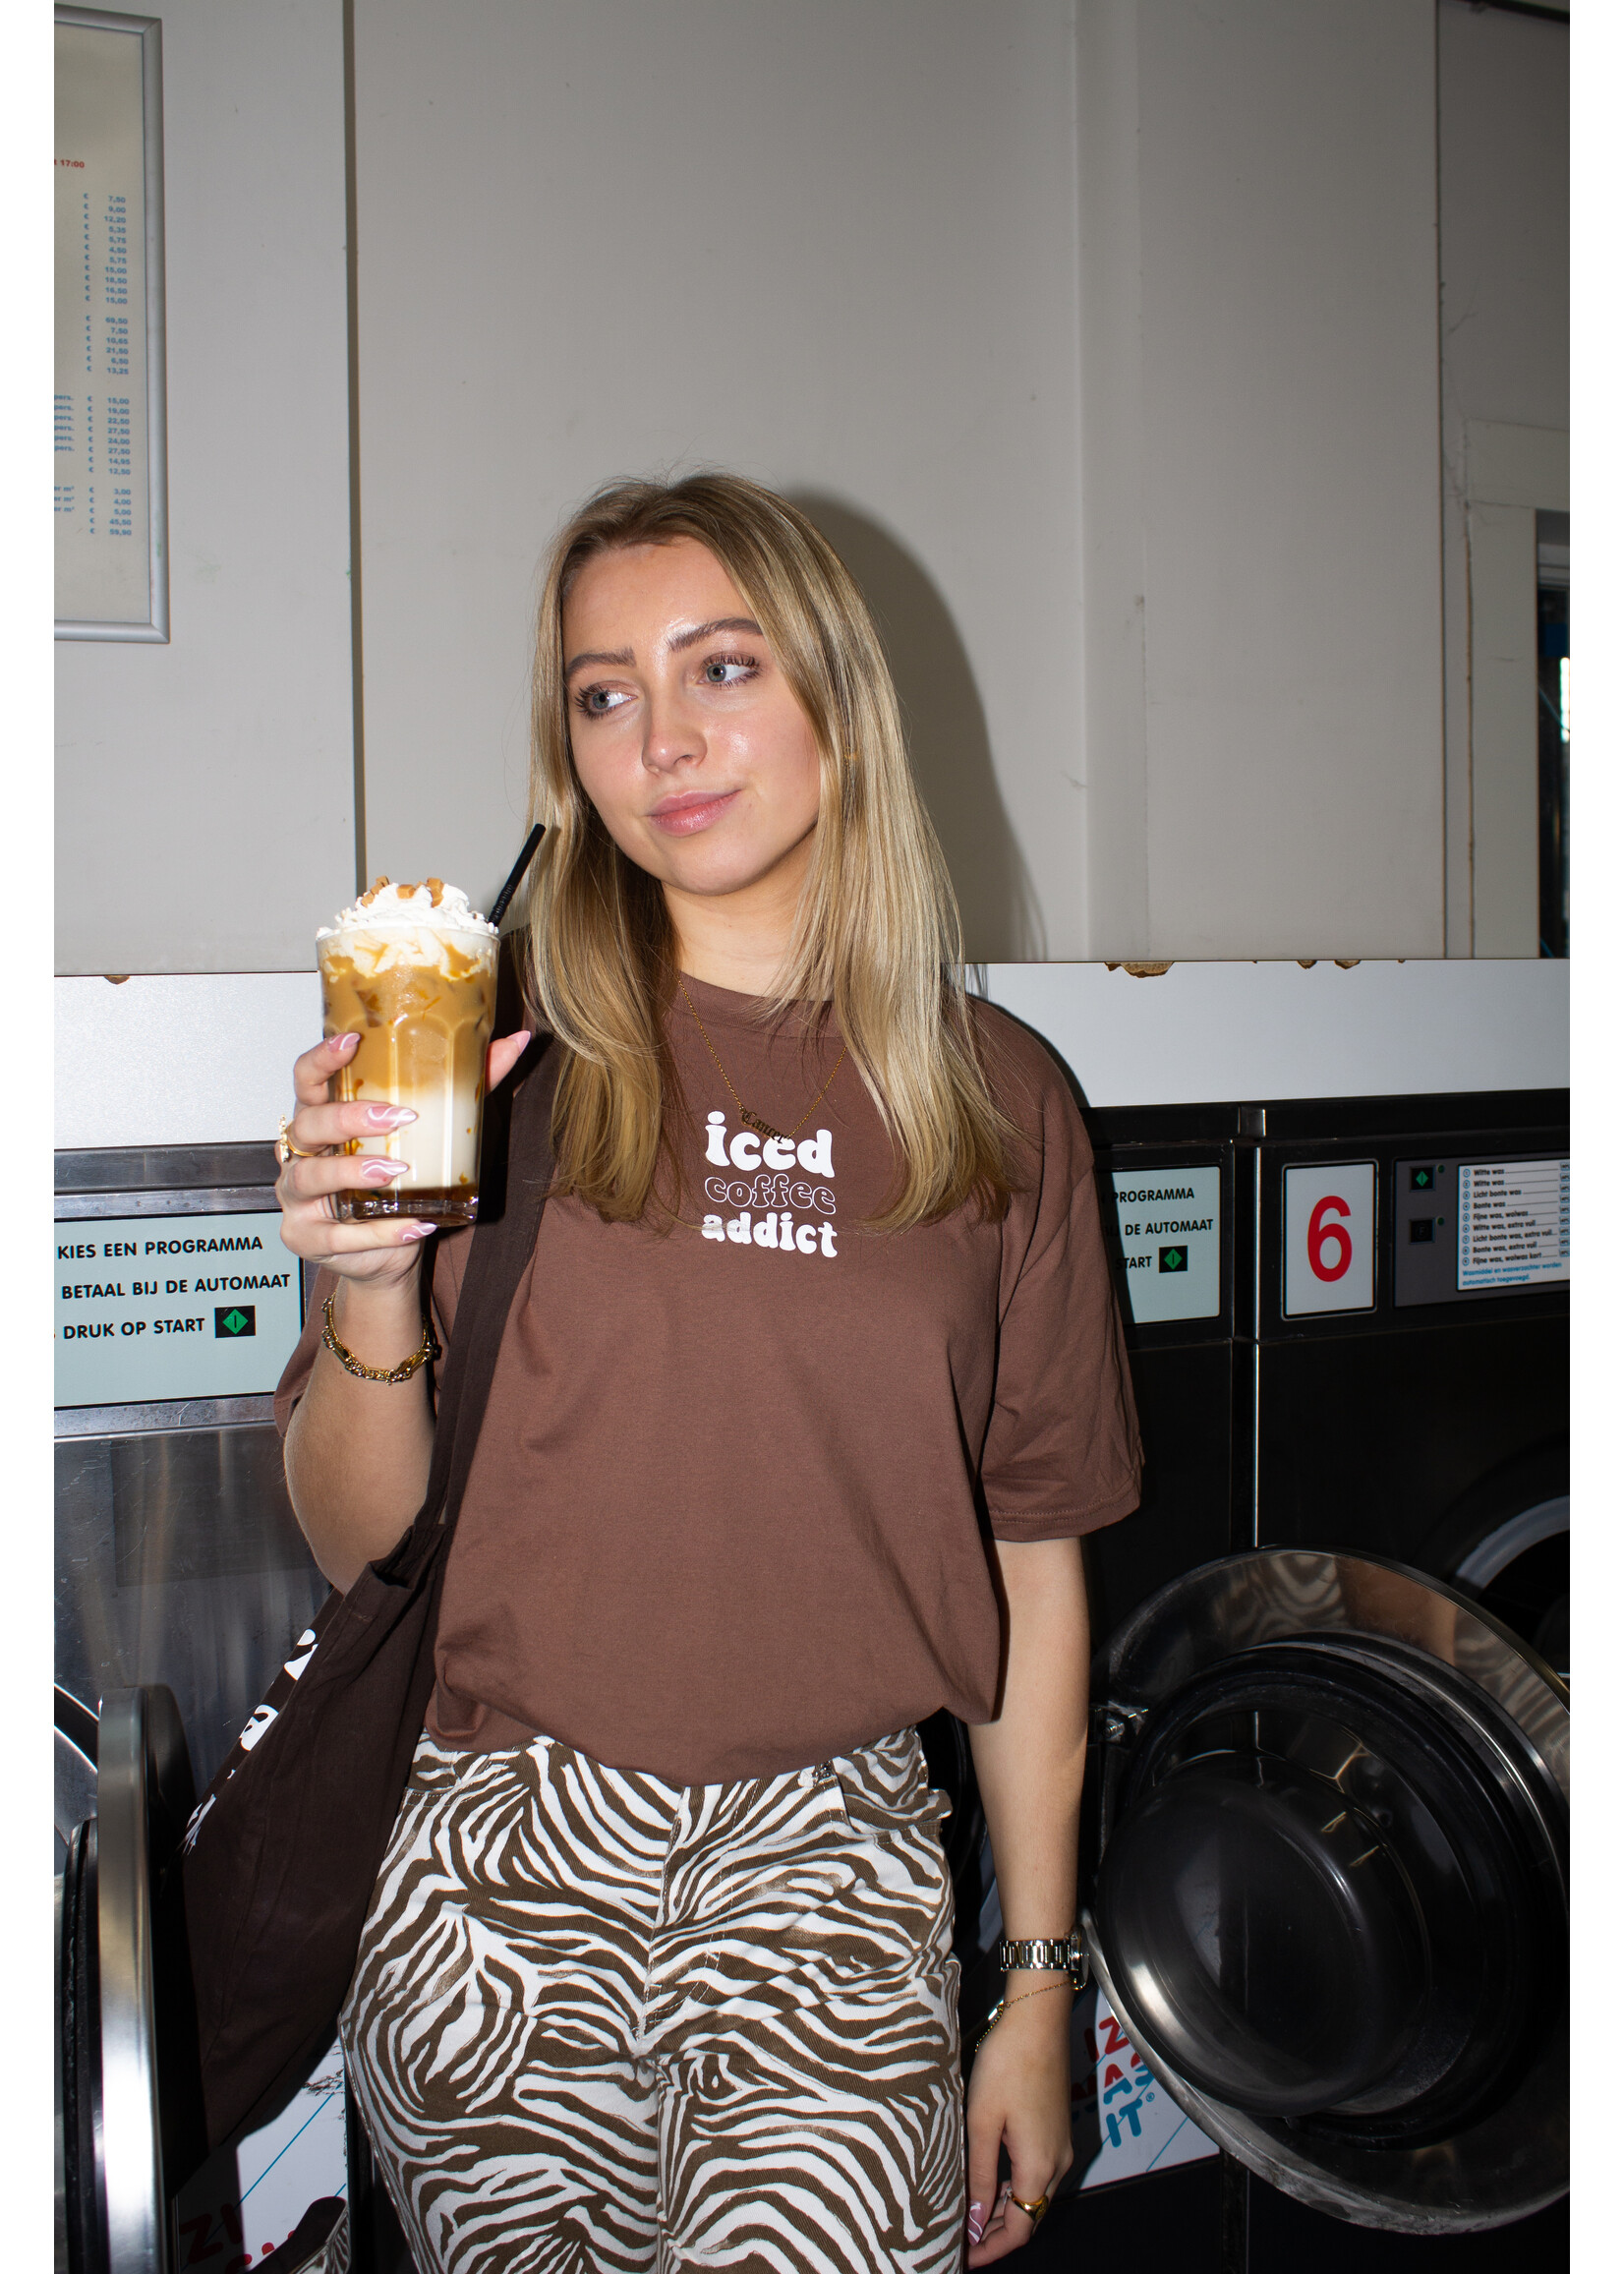 YOU ARE SPECIAL "Iced Coffee Addict" Brown T-Shirt